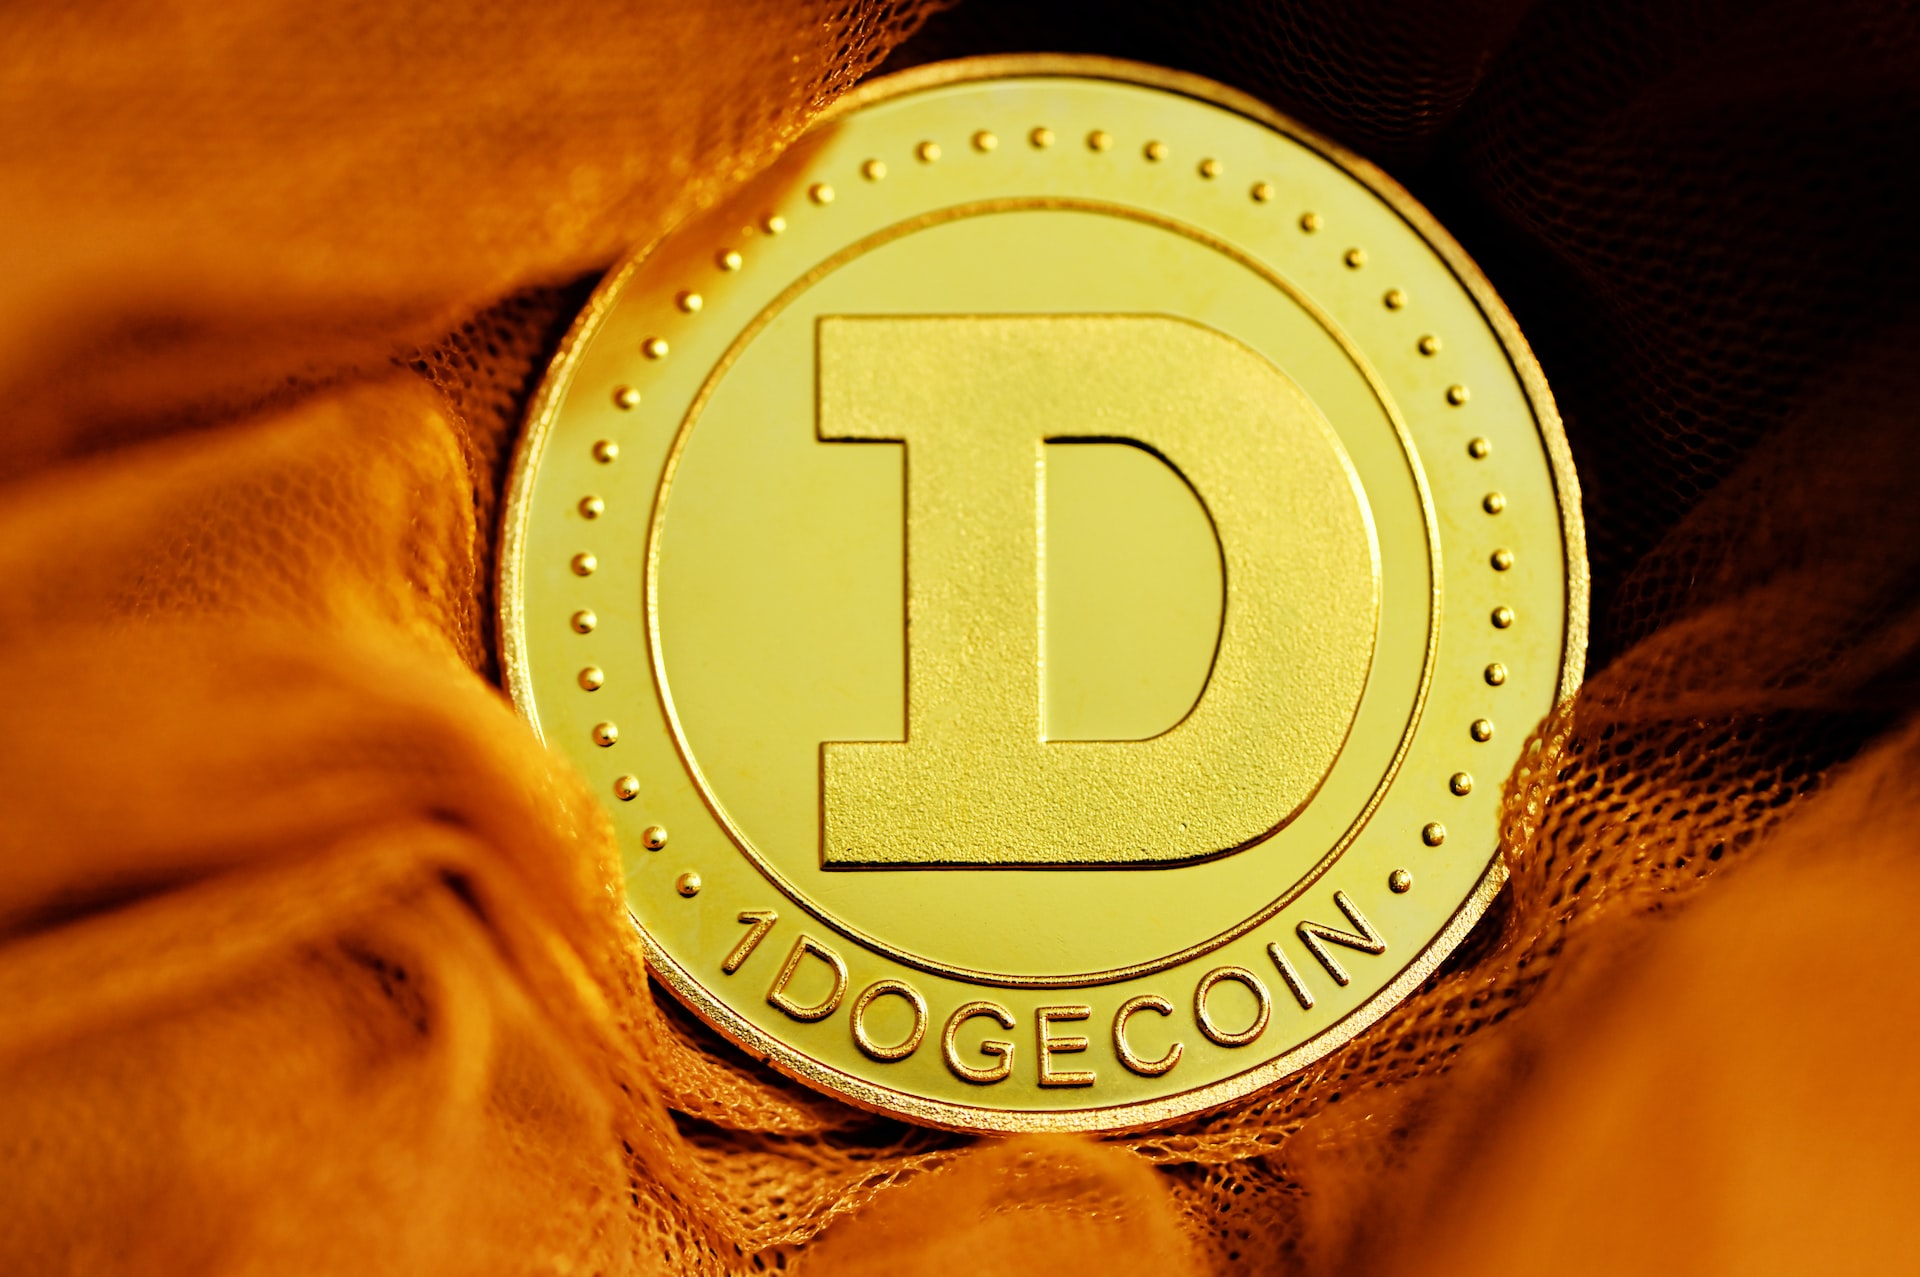 Dogecoin Price Could Skyrocket 430% From Current Levels, Crypto Analyst Suggests